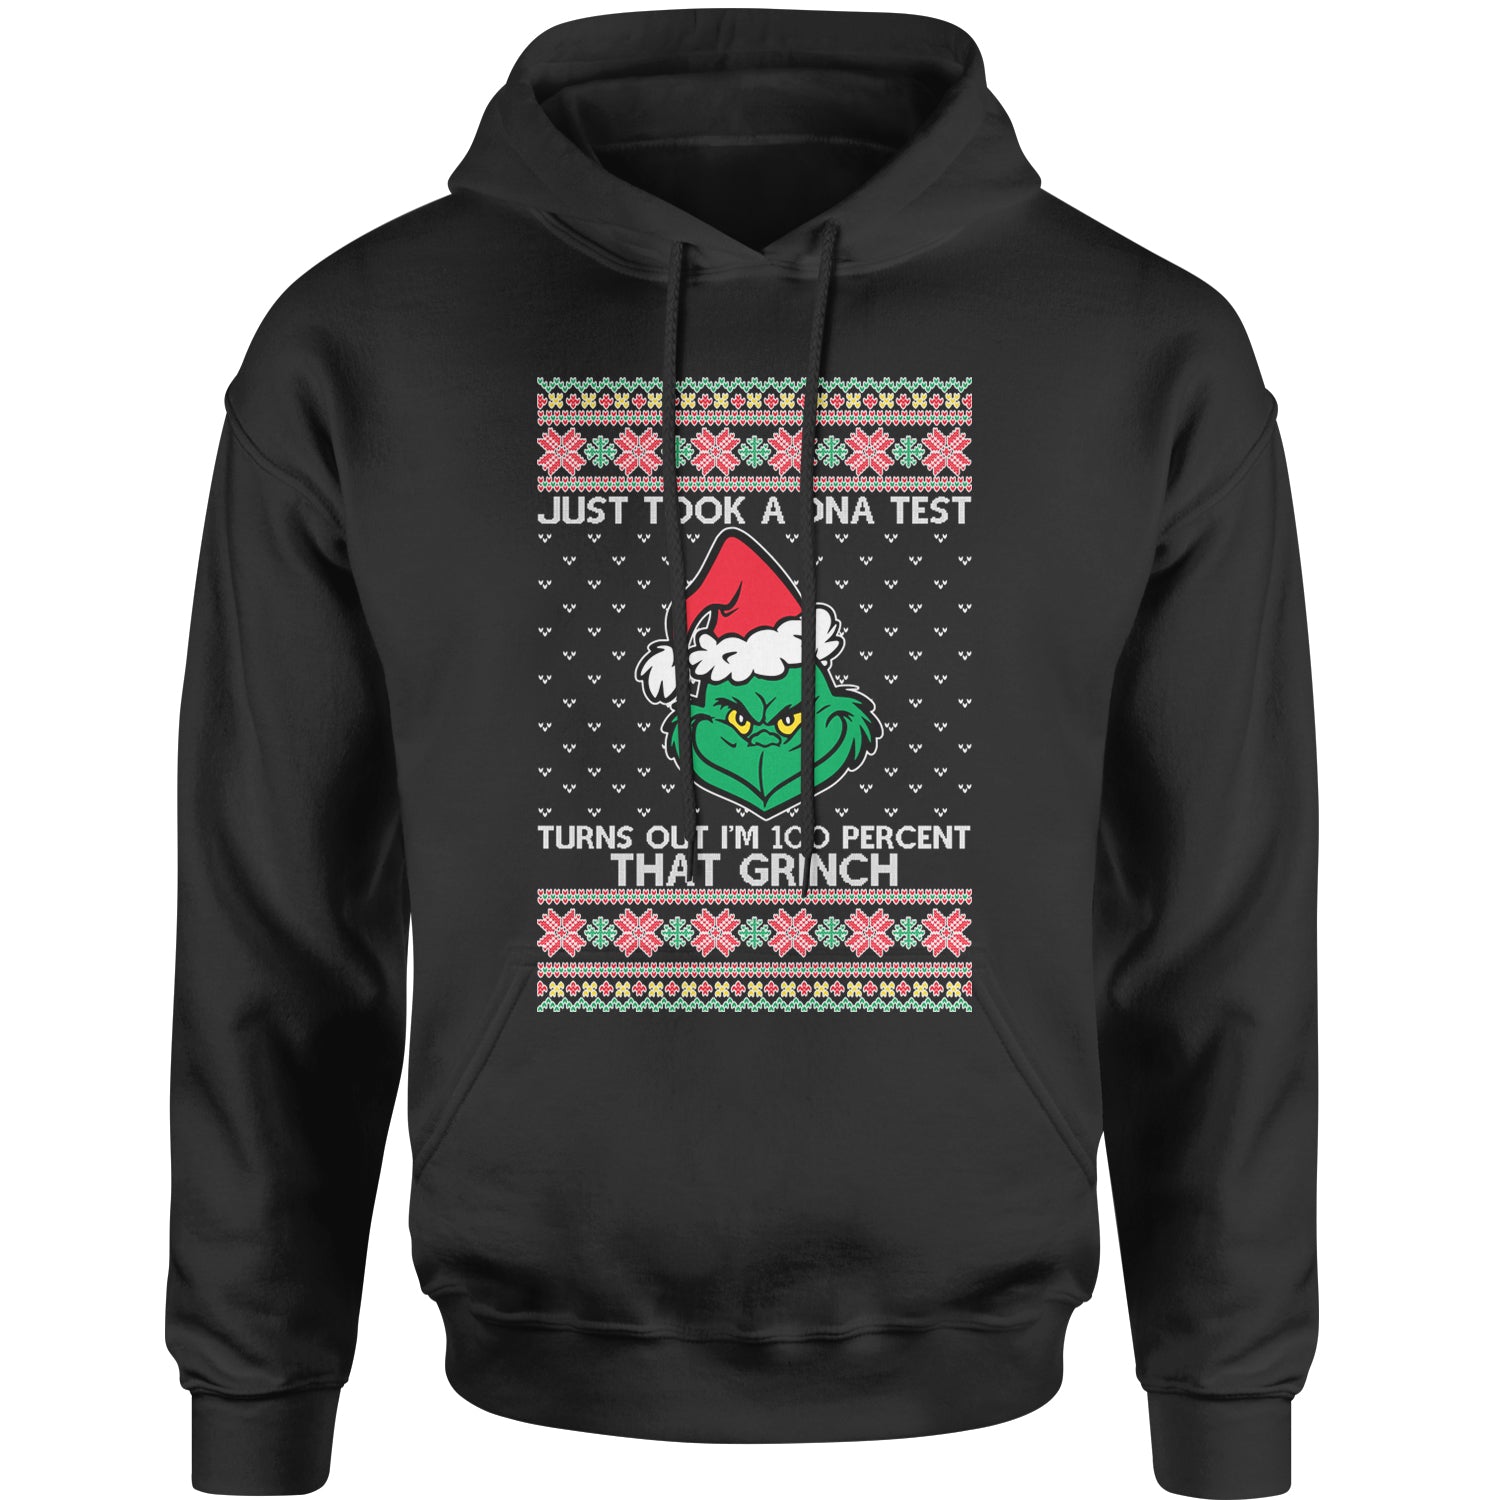 One Hundred Percent That Grinch Adult Hoodie Sweatshirt christmas, grinch, sweater, sweatshirt, ugly, xmas by Expression Tees